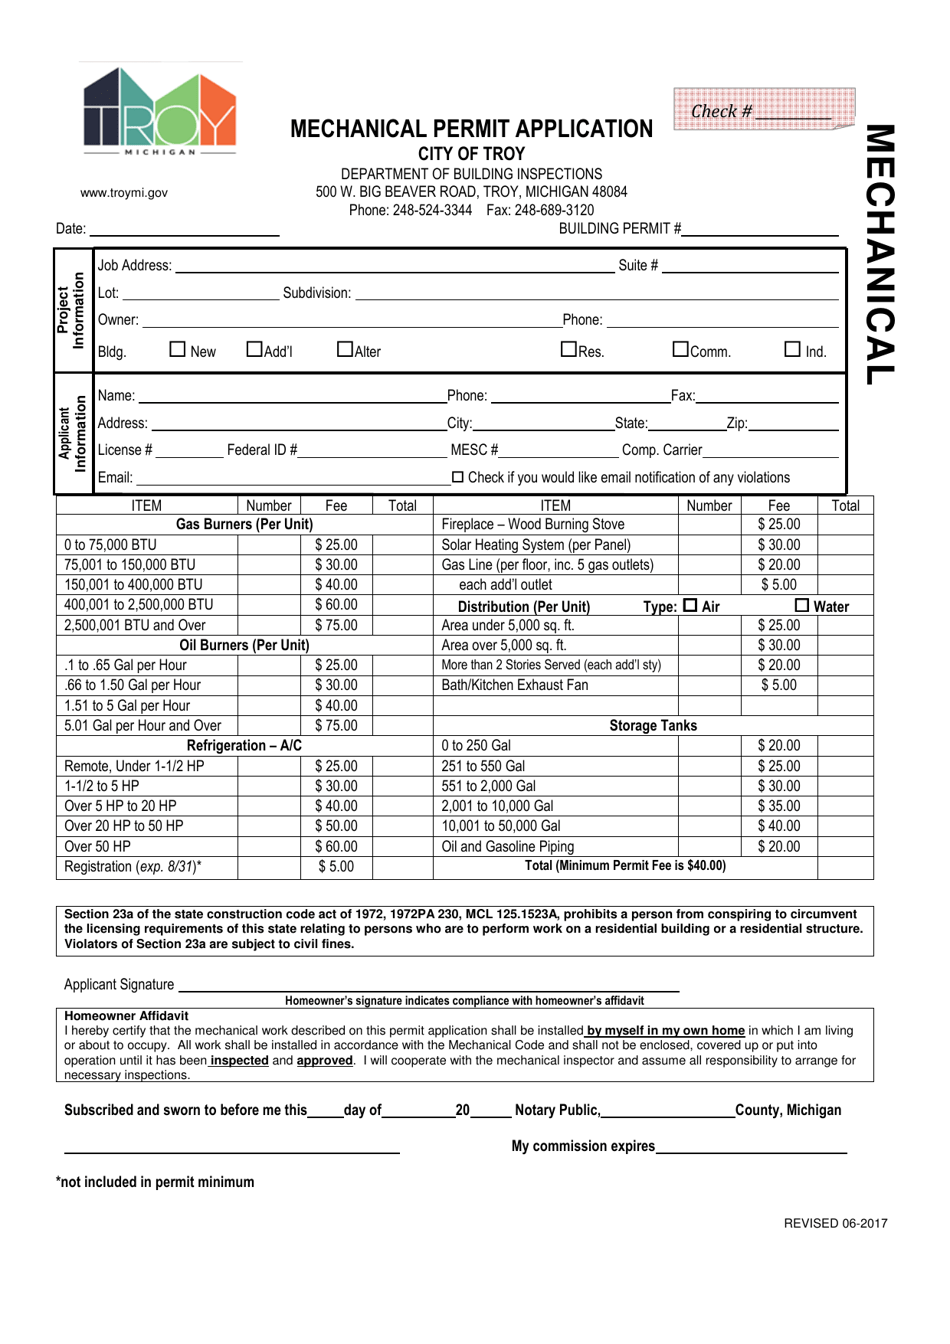 Mechanical Permit Application - City of Troy, Michigan, Page 1